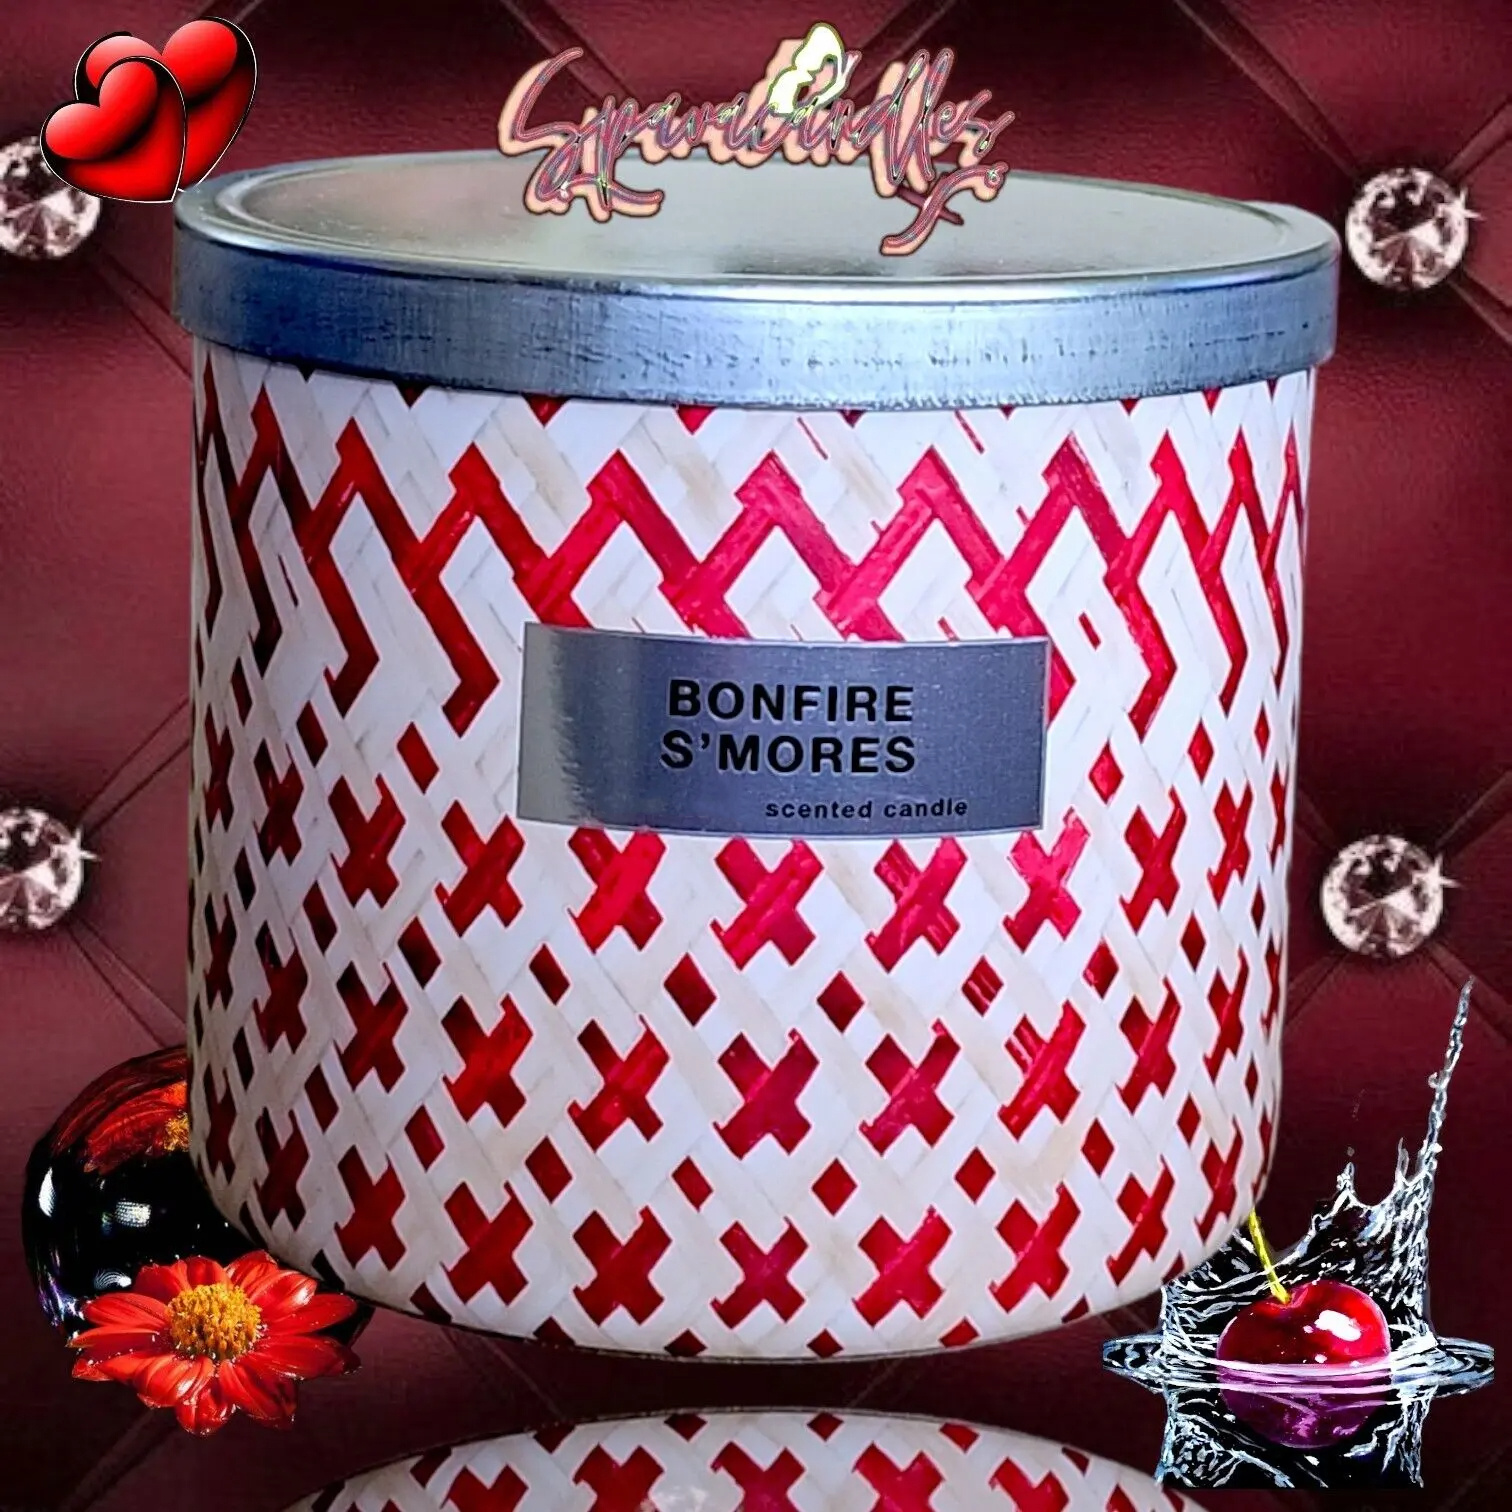 1 BONFIRE S'MORES LARGE FILLED SCENTED 3-WICK 14.5 OZ CANDLE